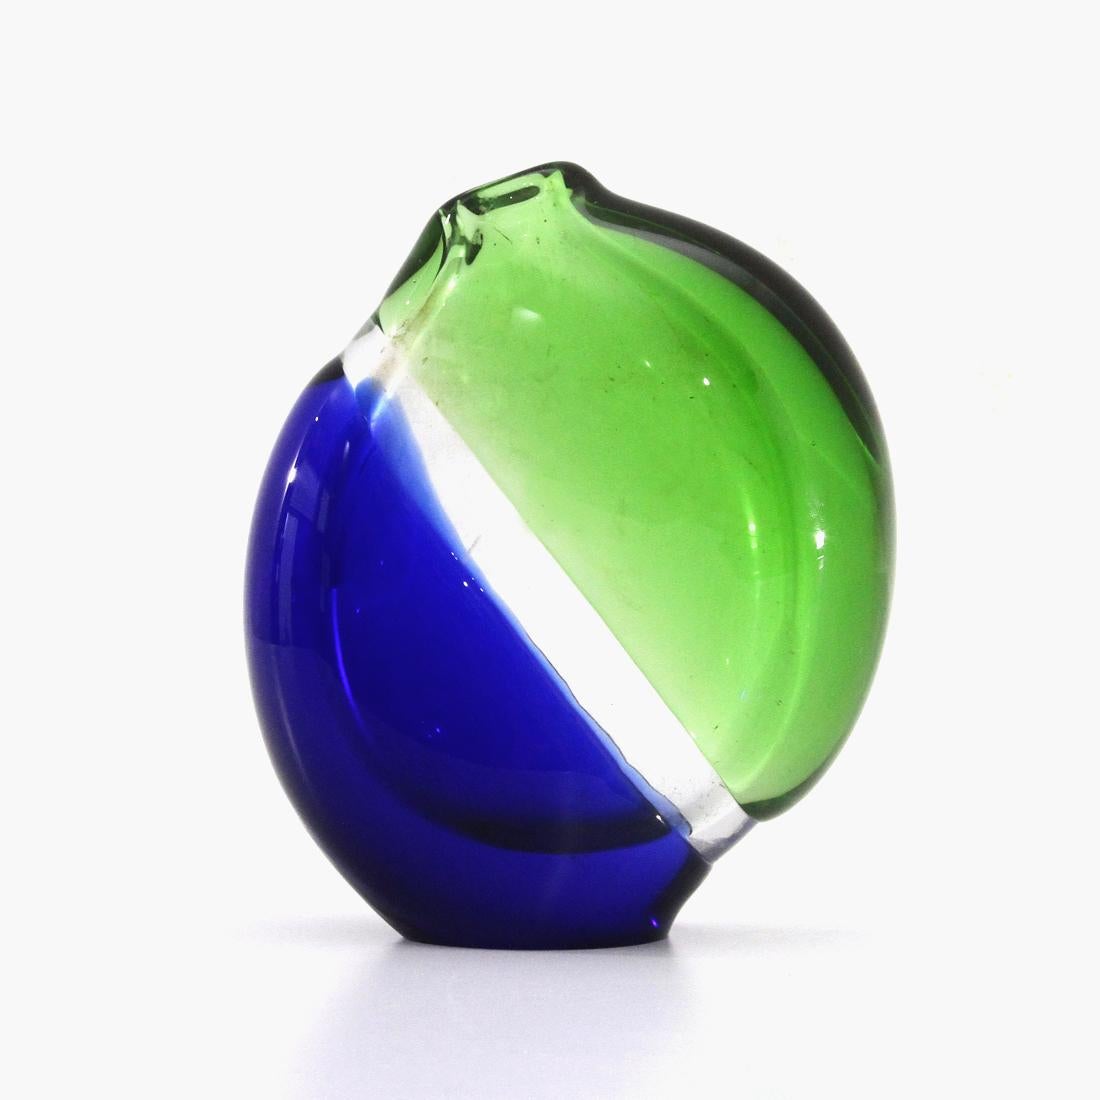 Mid-Century Modern Green and Blue Murano Glass Vase, 1960s For Sale